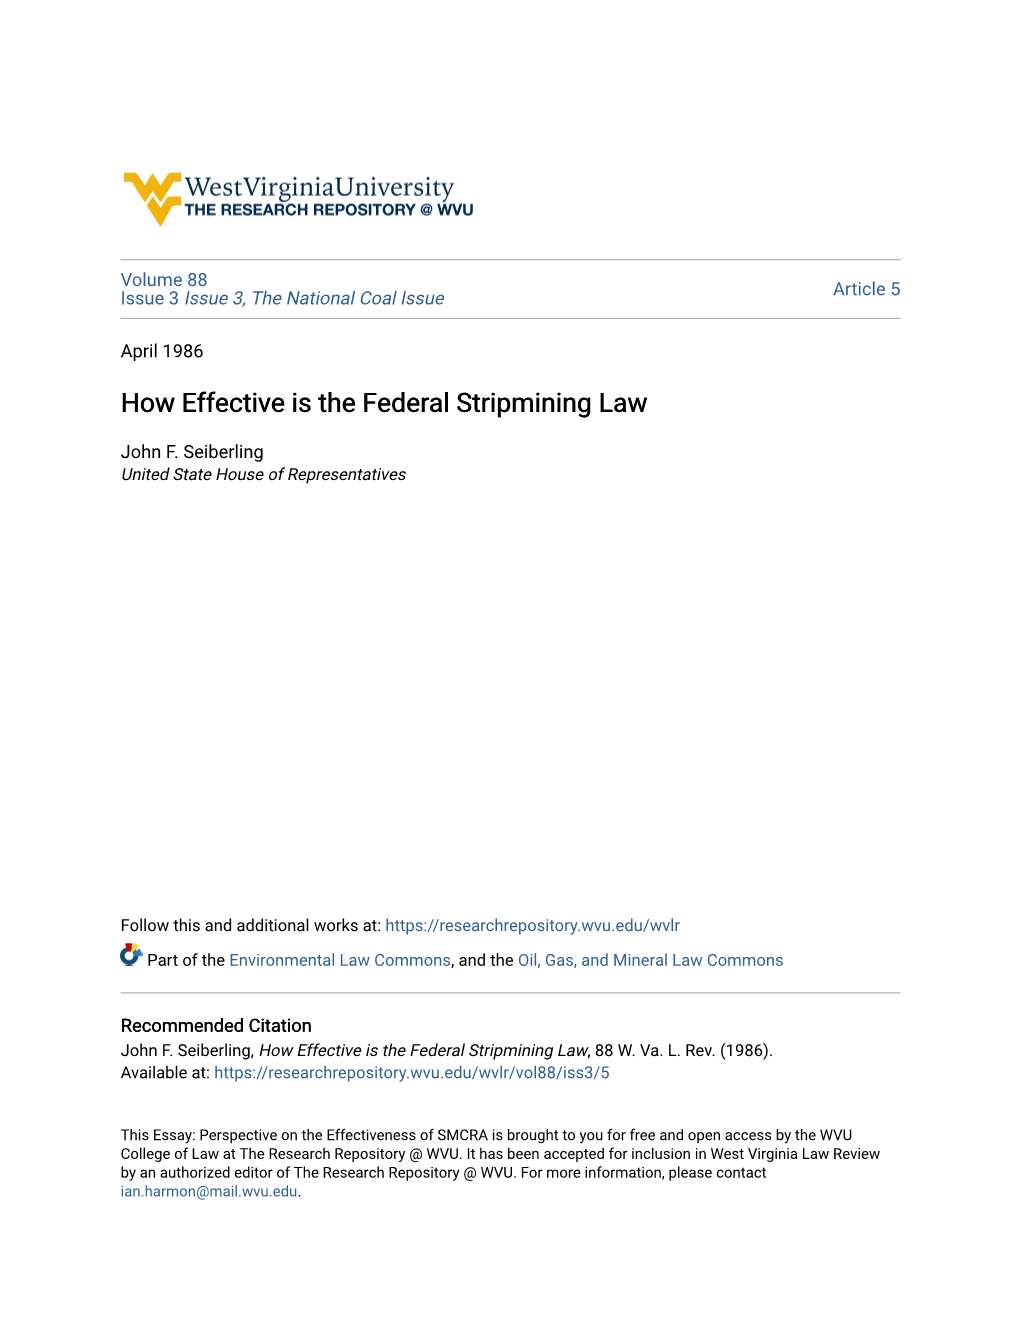 How Effective Is the Federal Stripmining Law